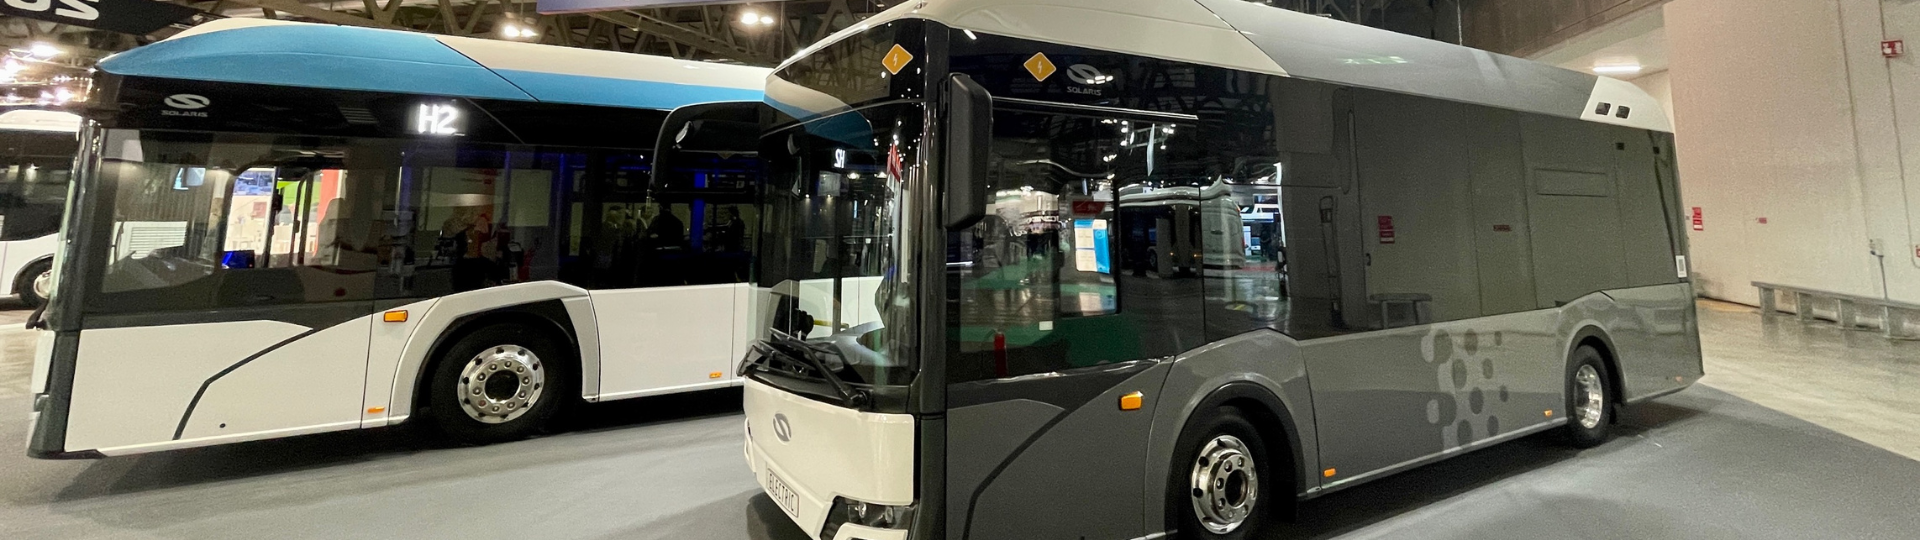 Solaris presents its articulated hydrogen bus and electric midibus at Next Mobility Exhibition 2022 in Milan